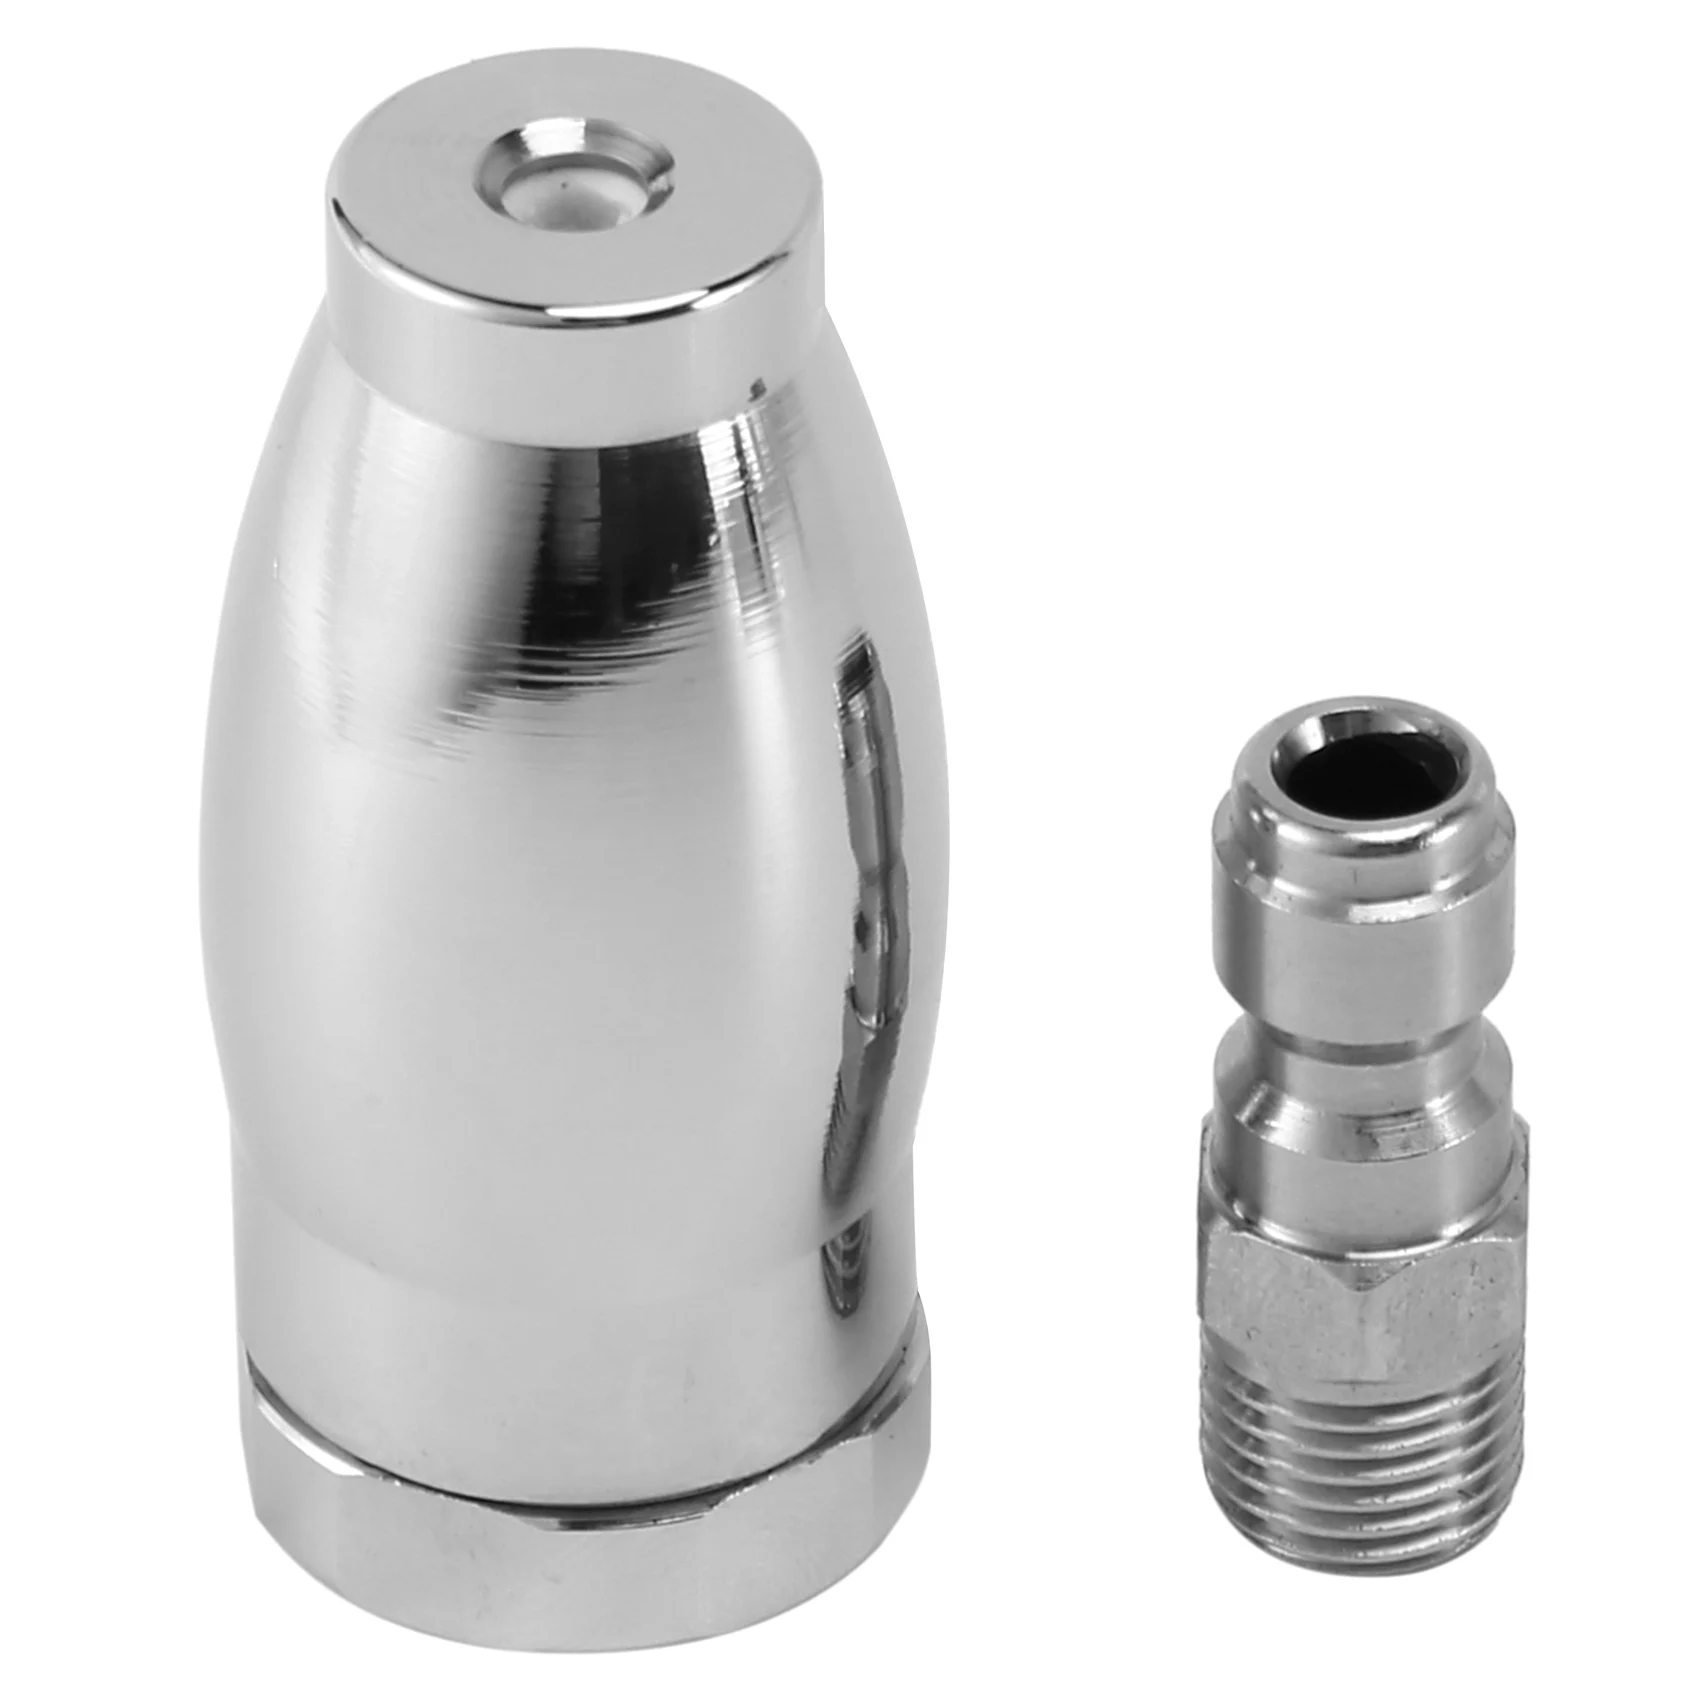 

Turbo Nozzle for Pressure Washer, Rotating Nozzle for Hot and Cold Water, 1/4 Inch Quick Connect, Orifice 3.0, 3600 PSI